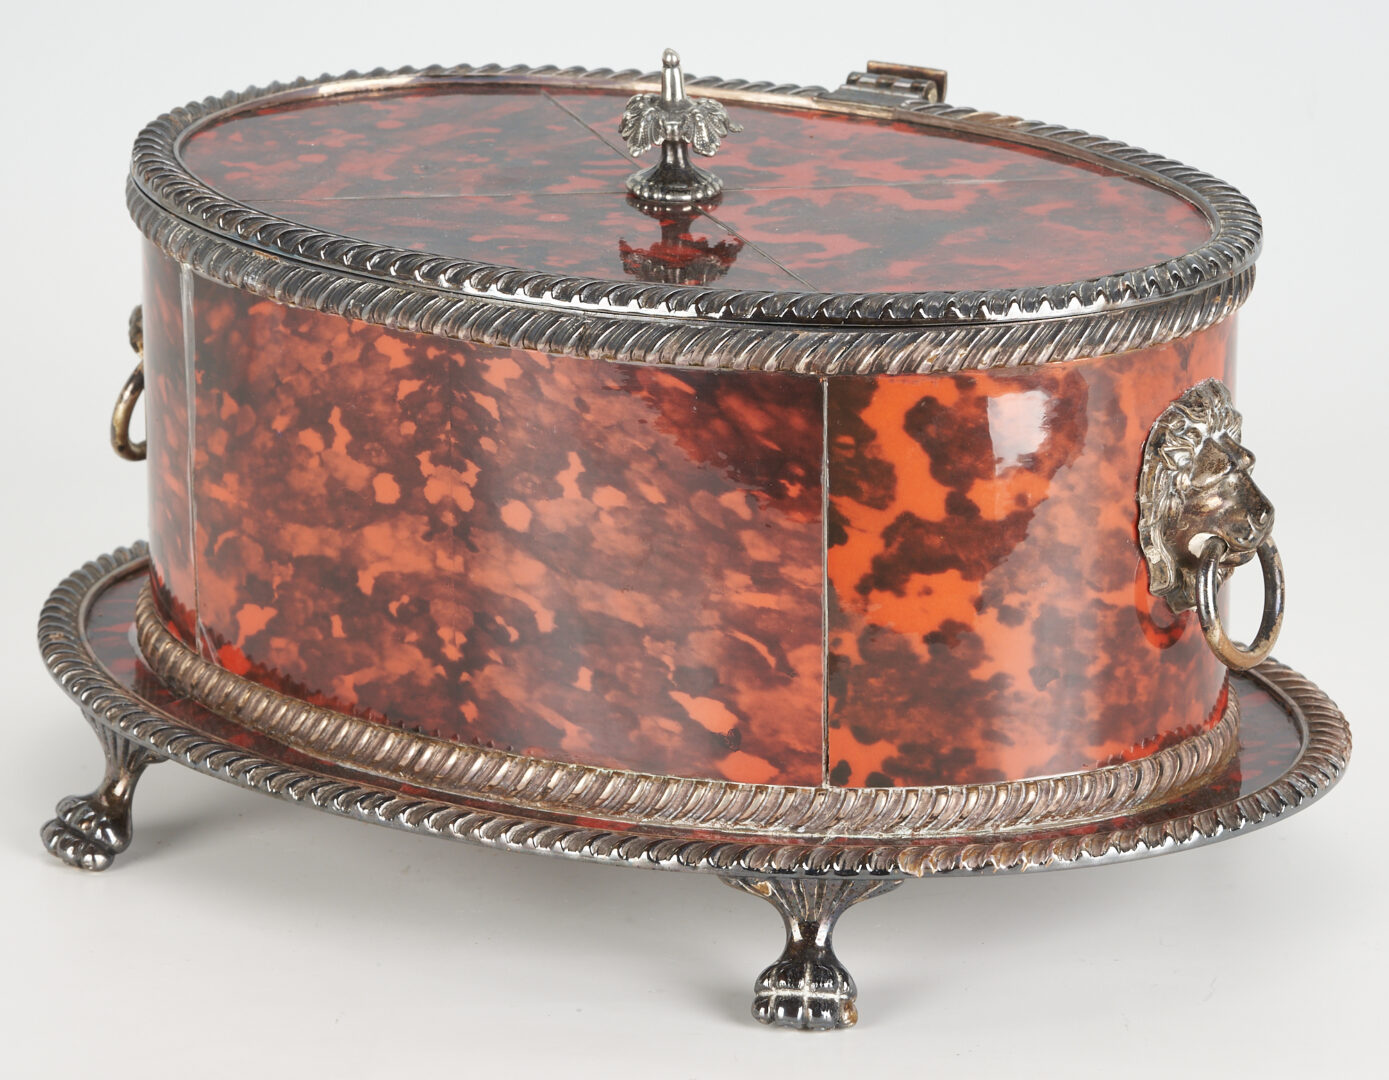 Lot 301: Faux Tortoise and Silverplated Biscuit Box